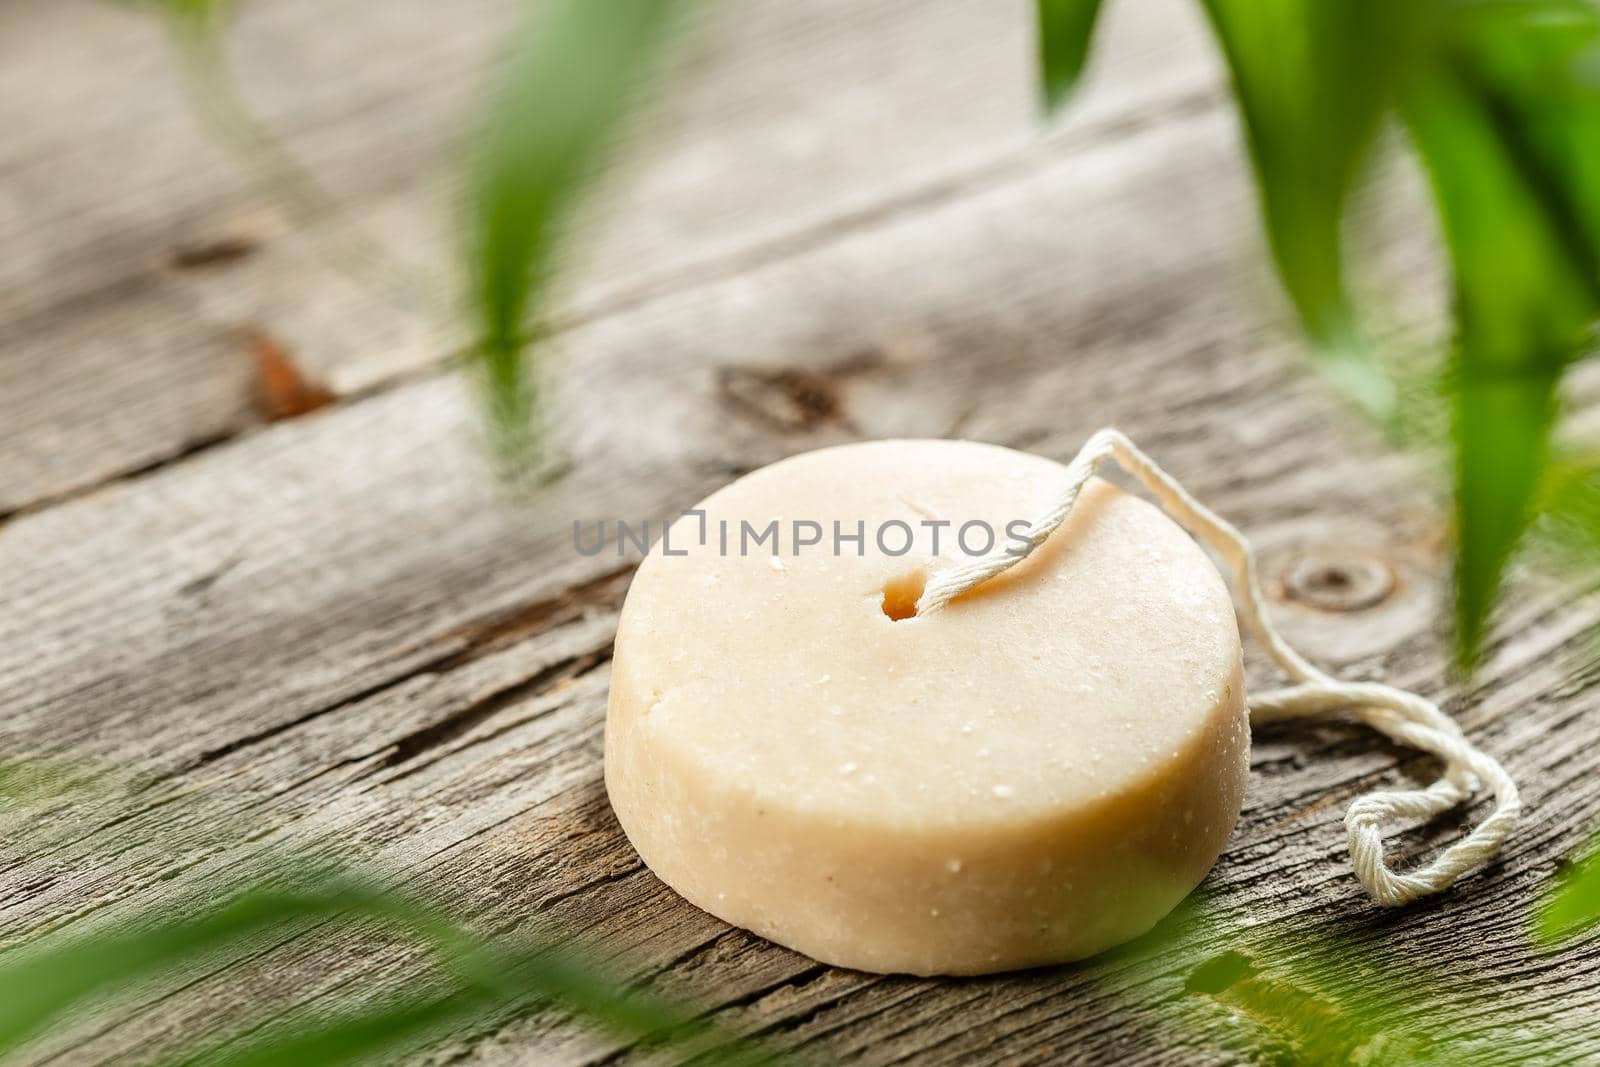 Handmade shampoo or soap bar on wooden background by Syvanych